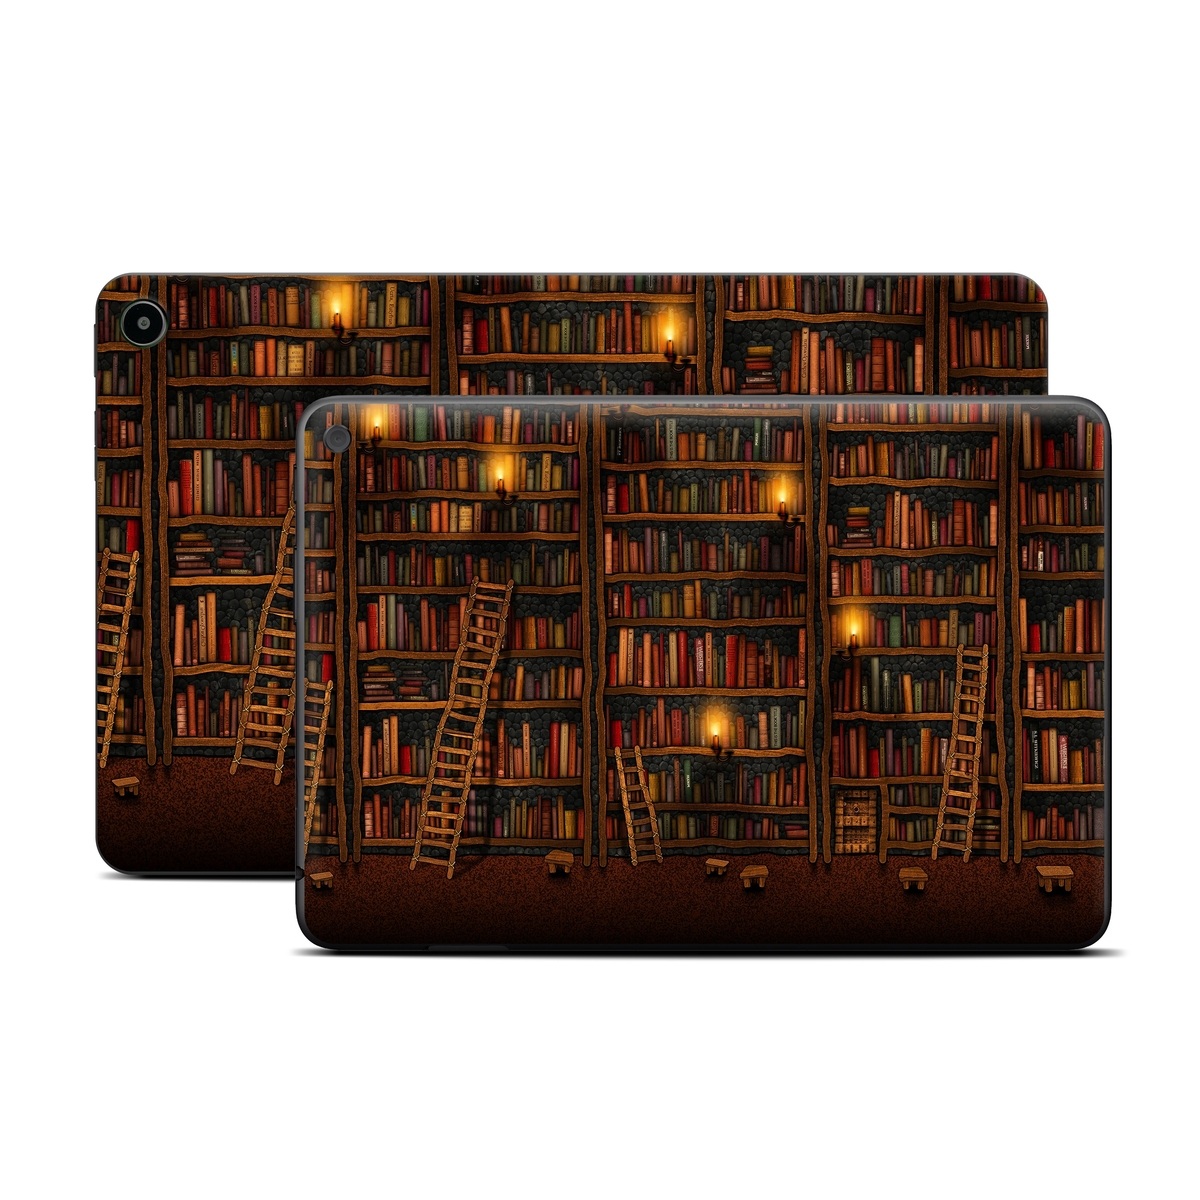 Amazon Fire Tablet Series Skin Skin design of Shelving, Library, Bookcase, Shelf, Furniture, Book, Building, Publication, Room, Darkness, with black, red colors